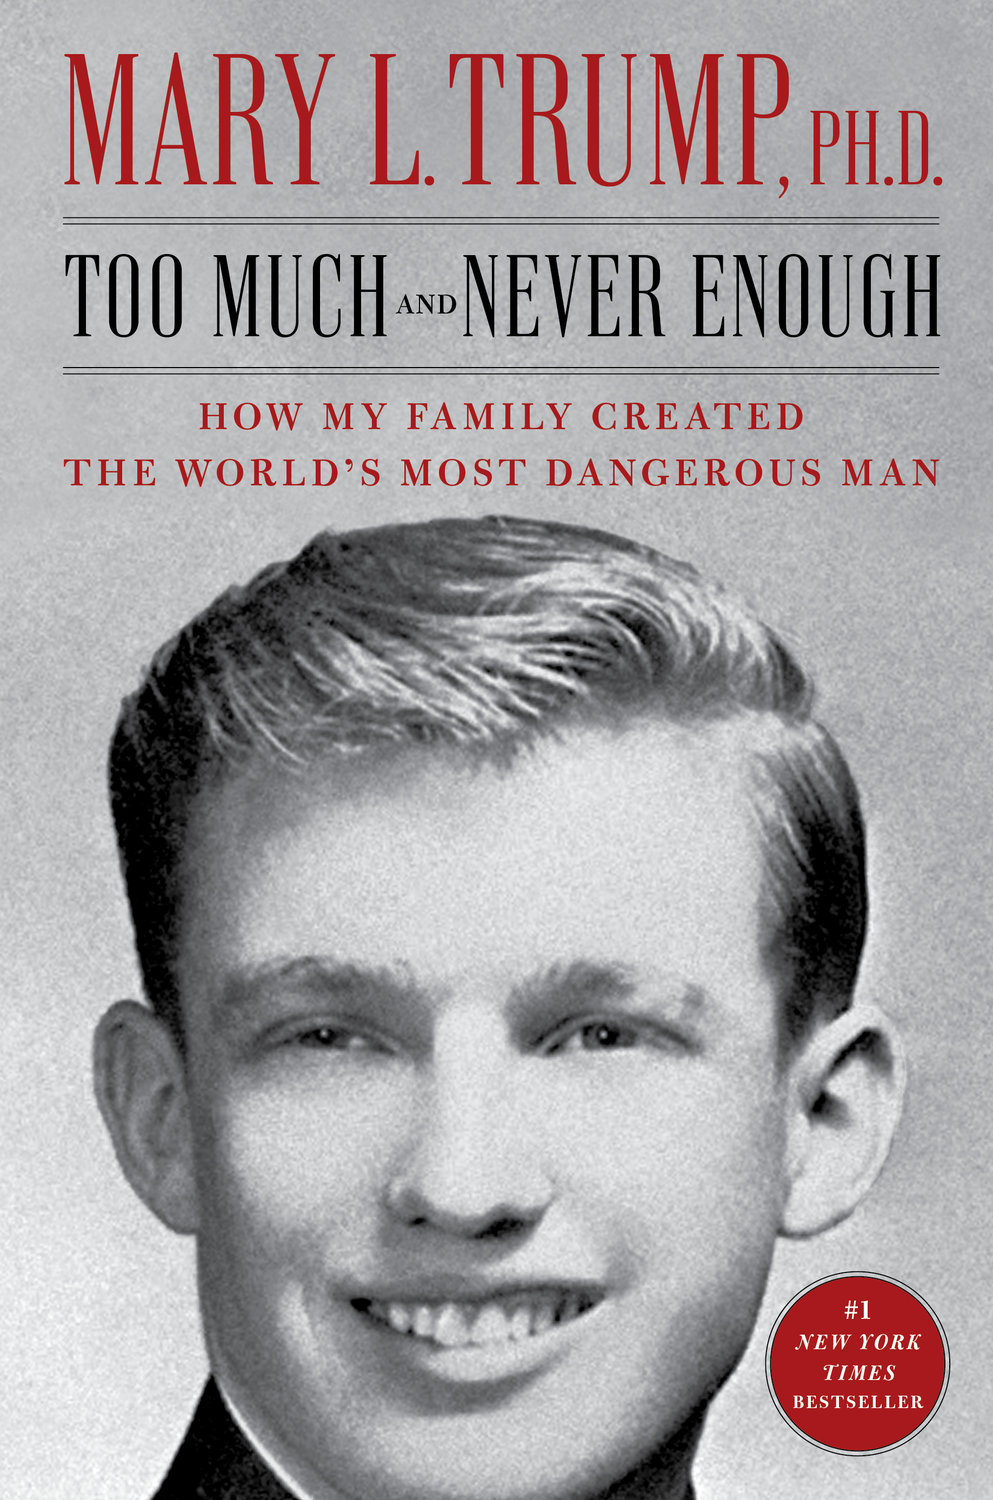 Mary Trump’s best-seller, “Too Much and Never Enough: How My Family Created the World’s Most Dangerous Man,” brought her widespread acclaim — and some derision on Twitter.